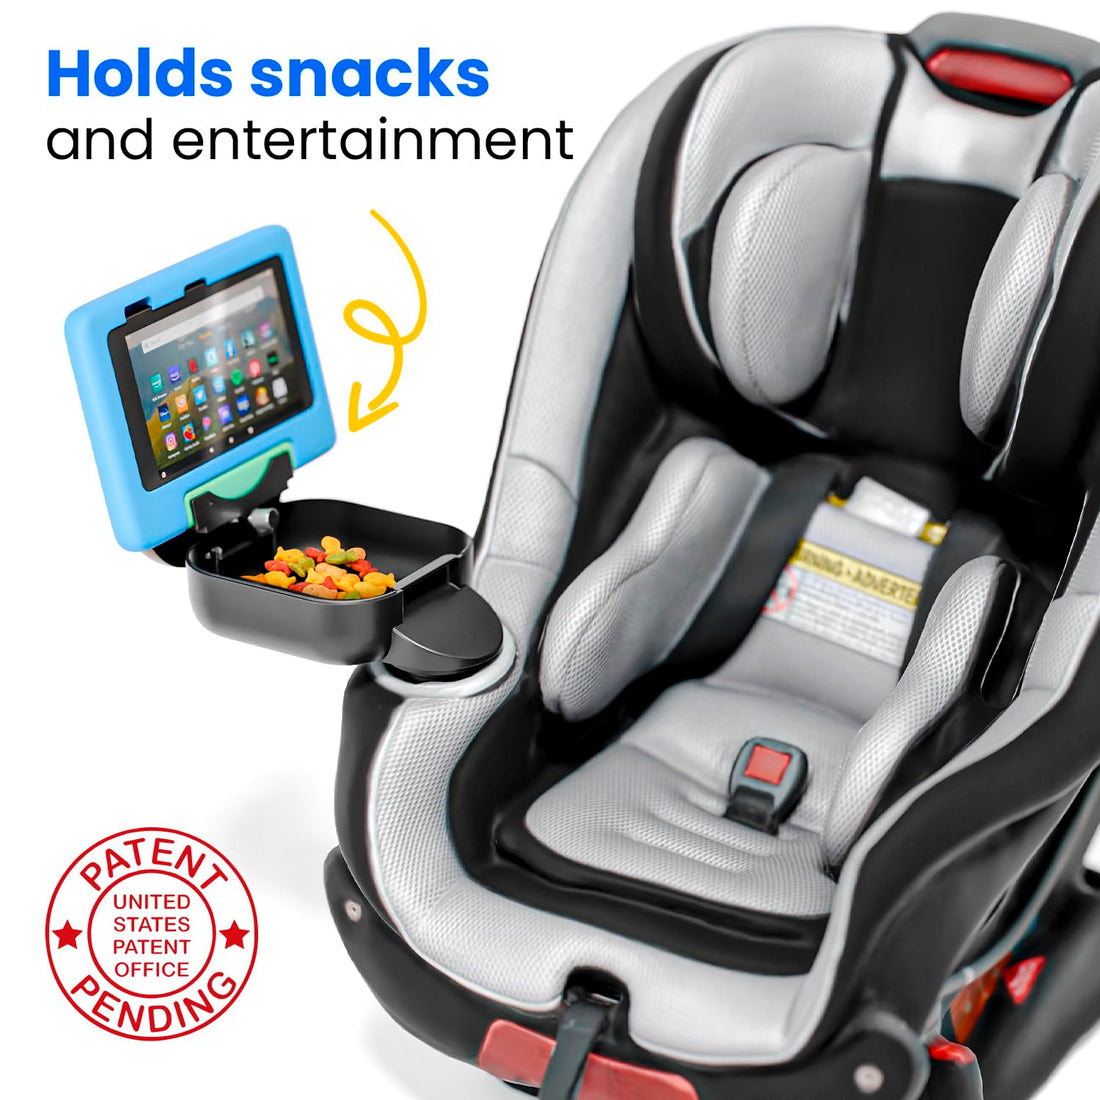 Integral Kid's Console - Car Seat Cup Holder Storage Container with Latch and Tablet Mount